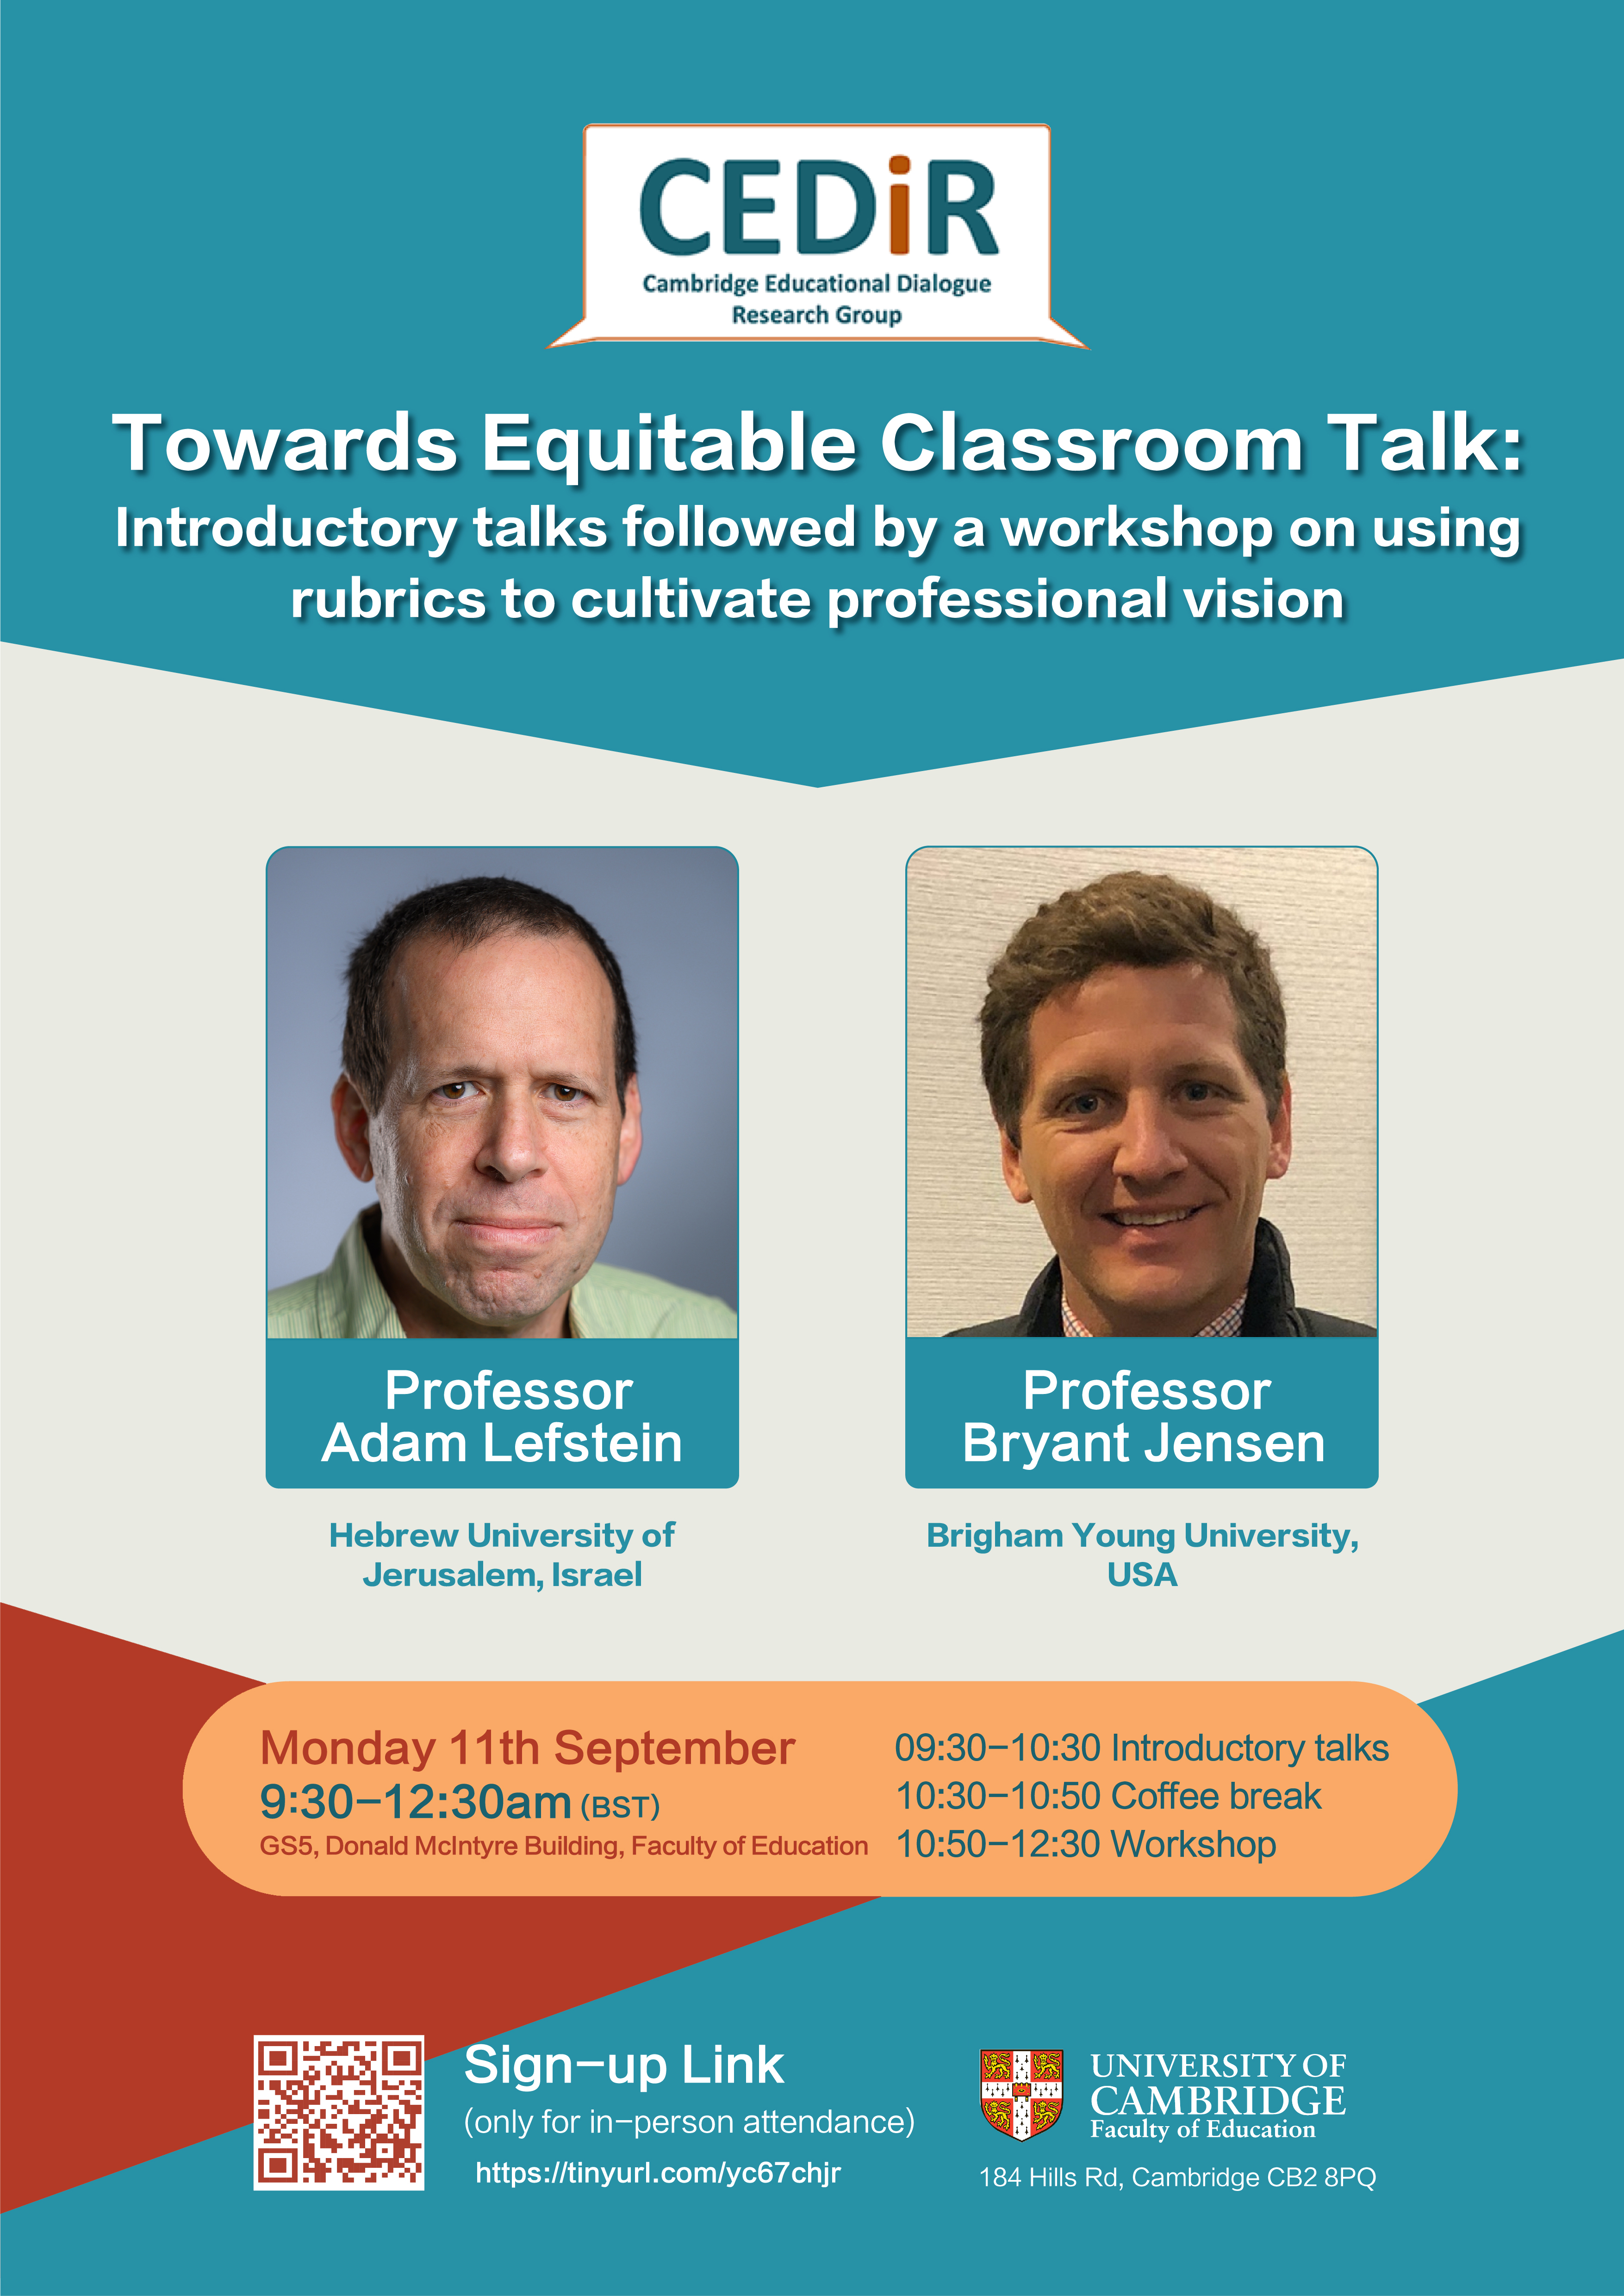 Poster with details of workshop on 11th September: Towards equitable classroom talk, 9.30-12.30 BST, in GS5, Donald McIntyre Building. Speakers Professor Adam Lefstein and Professor Bryant Jensen